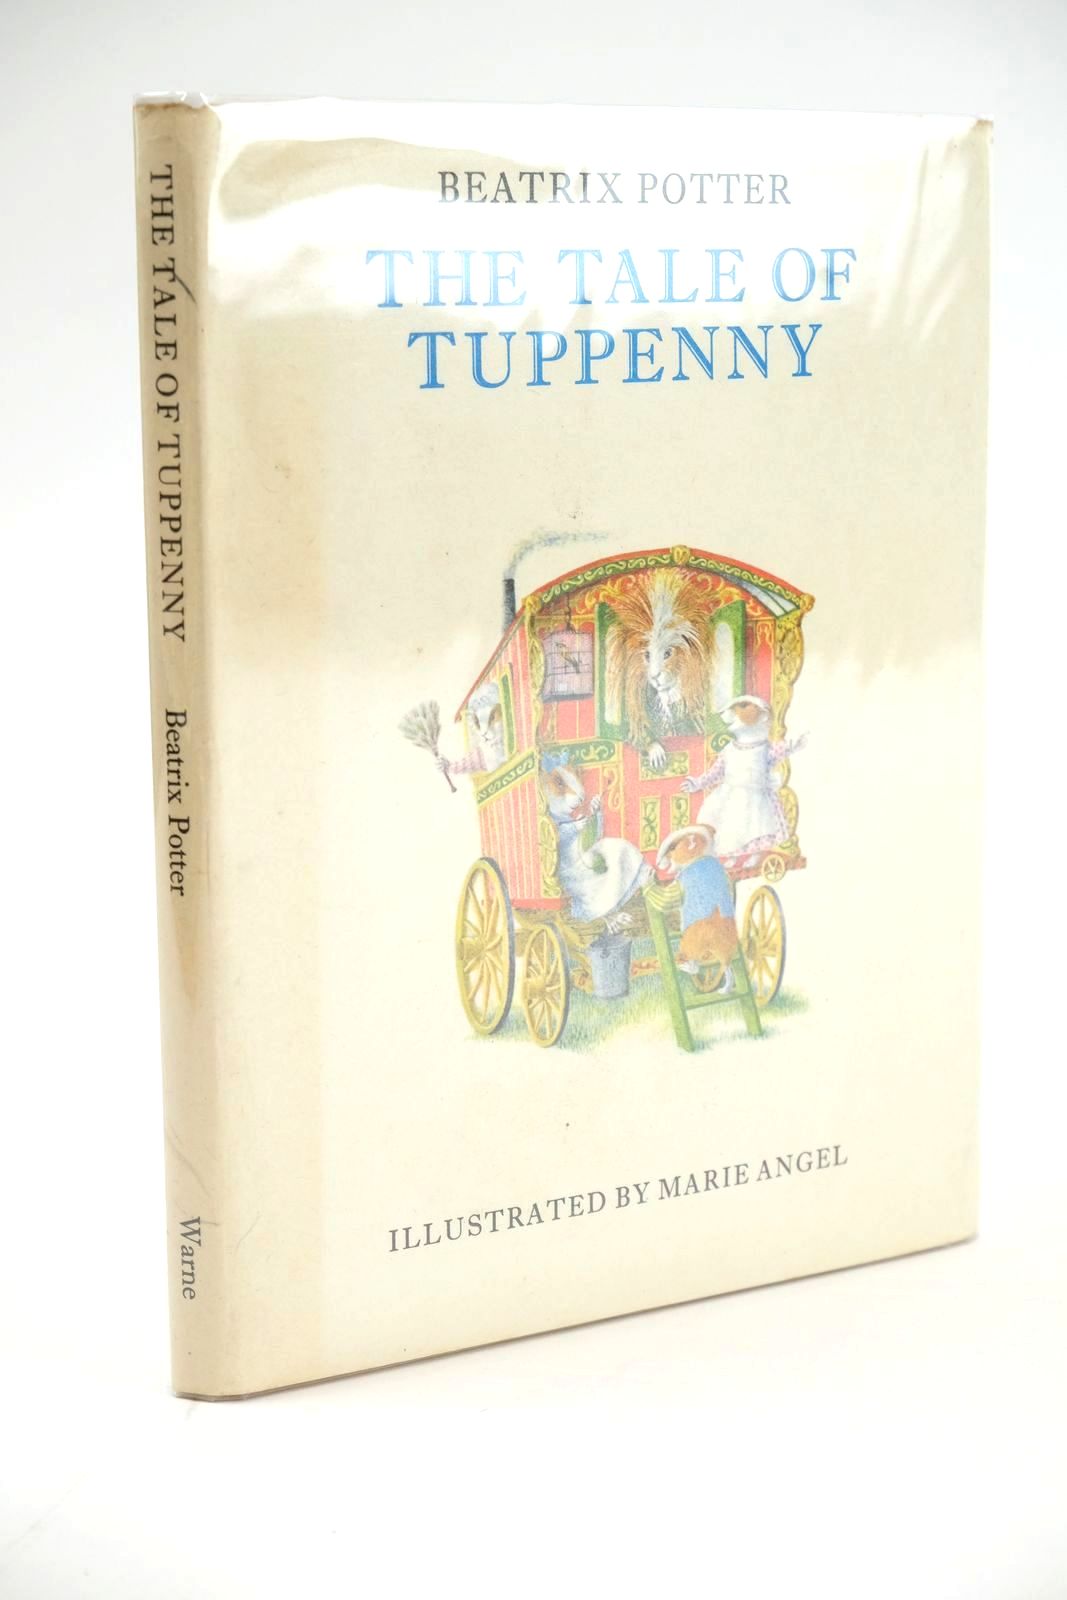 Photo of THE TALE OF TUPPENNY written by Potter, Beatrix illustrated by Angel, Marie published by Frederick Warne &amp; Co Ltd. (STOCK CODE: 1324631)  for sale by Stella & Rose's Books